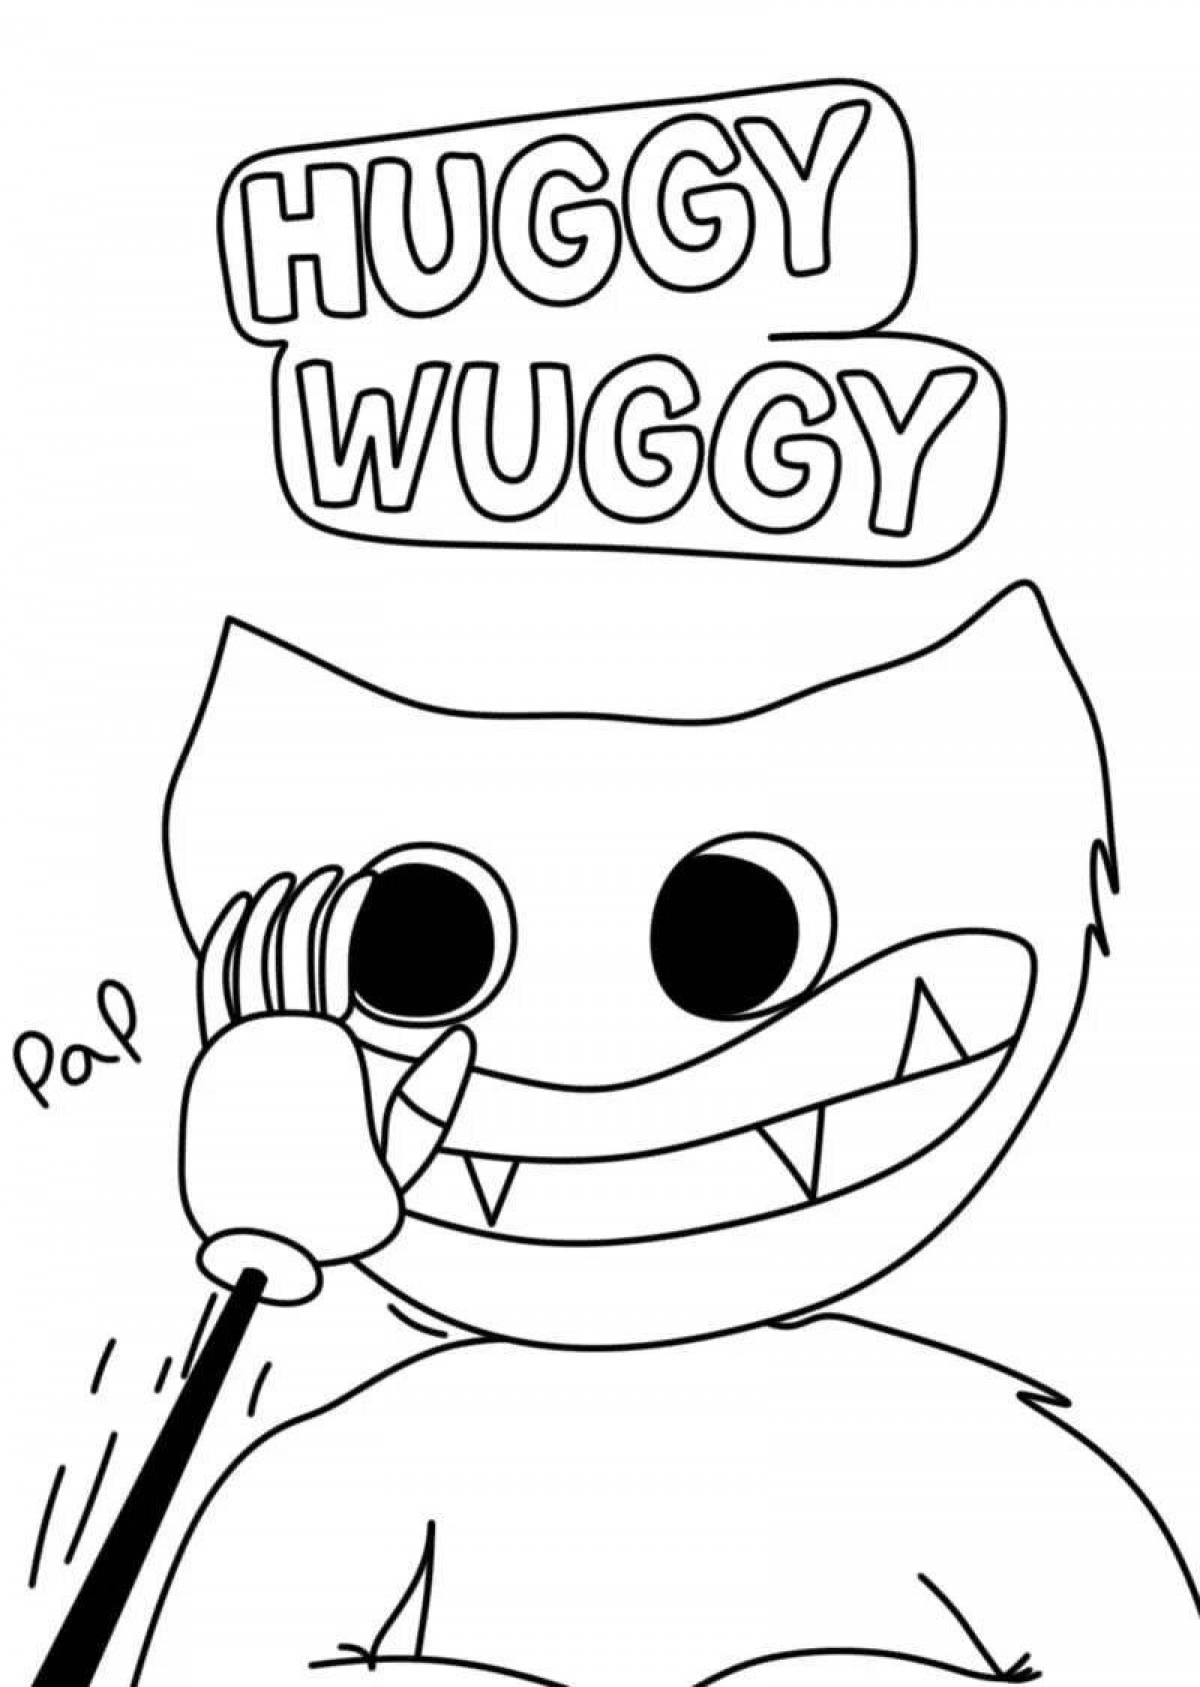 Vivacious huggies waggie coloring page